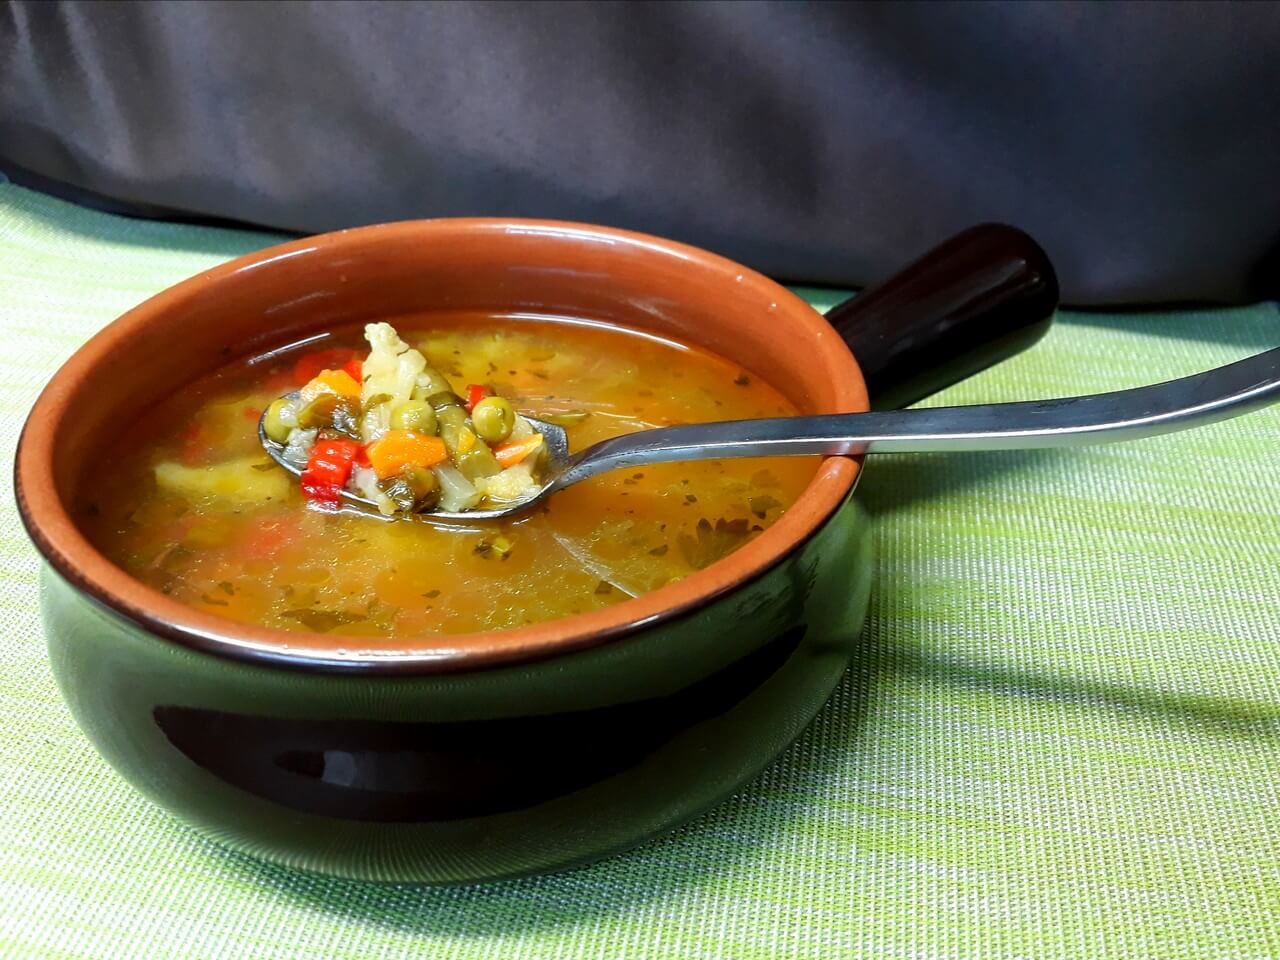 Vegetable soup, Siam, served in a bowl